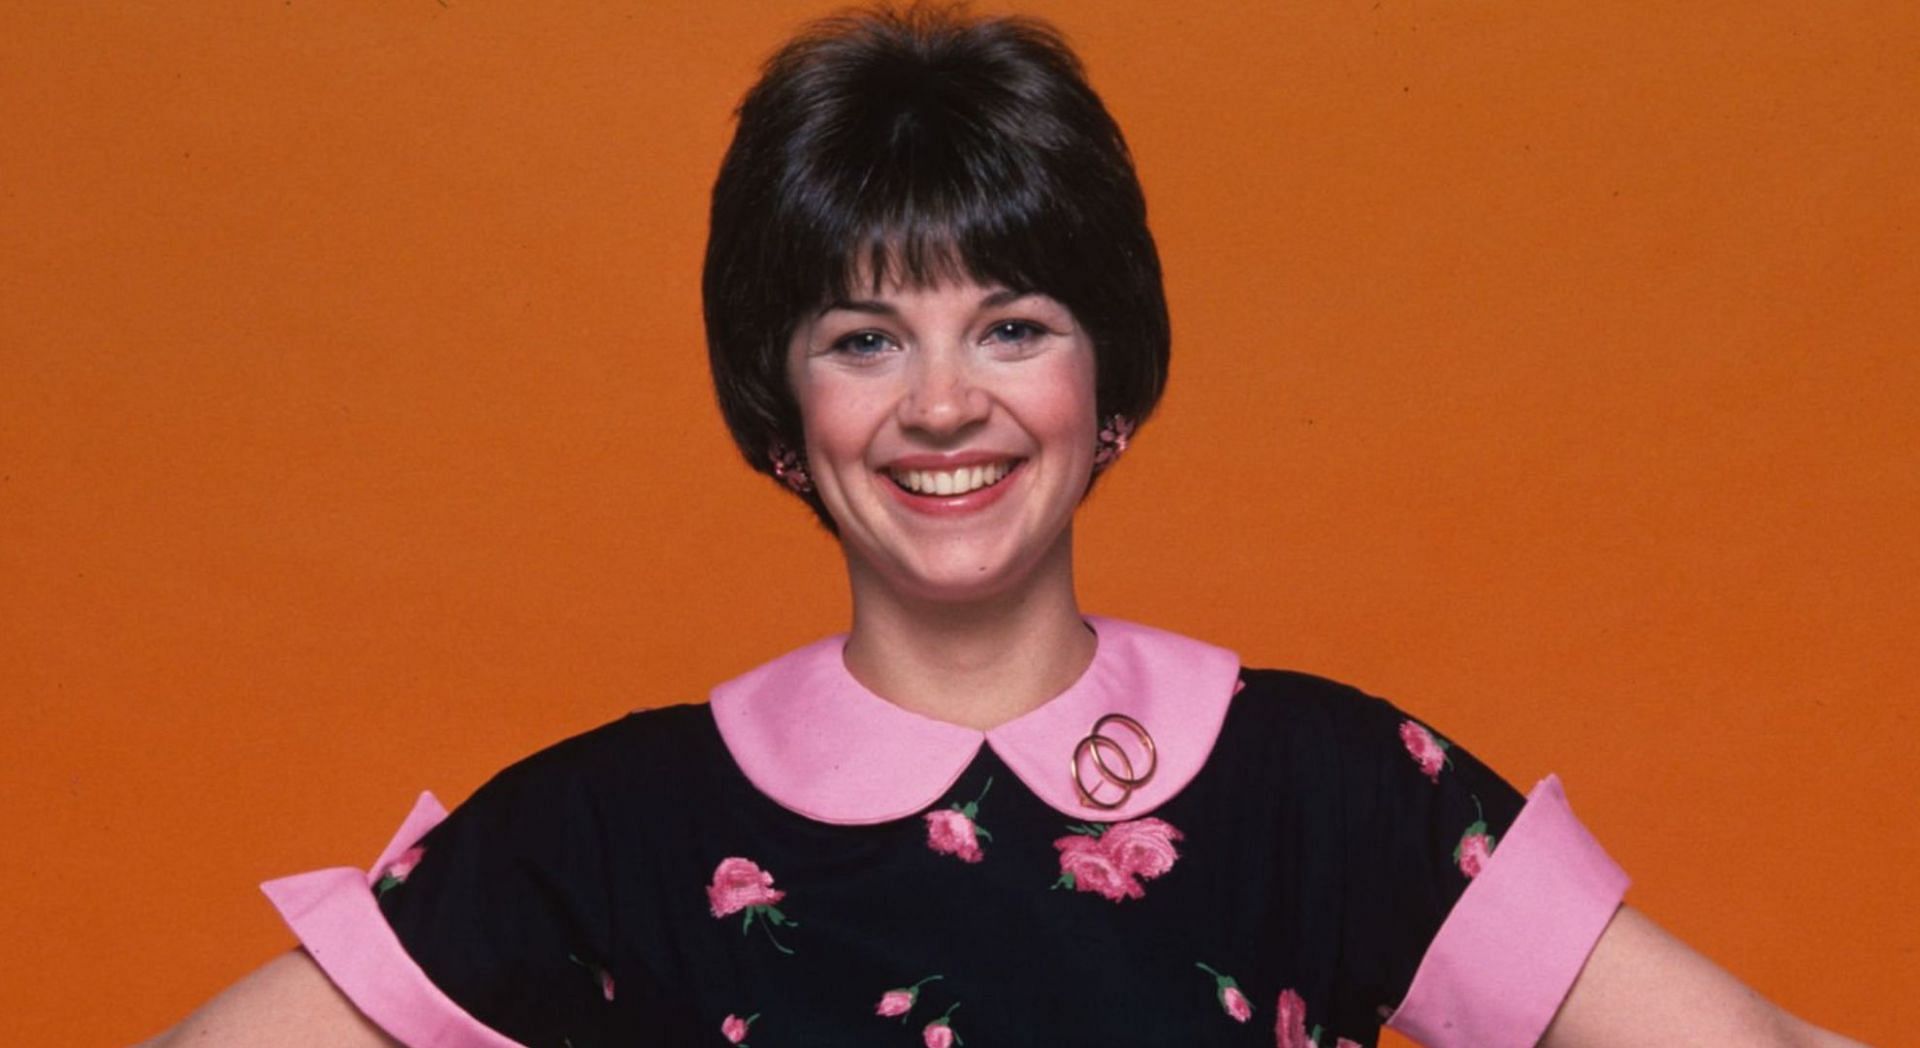 Cindy Williams was married to Bill Hudson and the pair had two children together (Image via Getty Images)